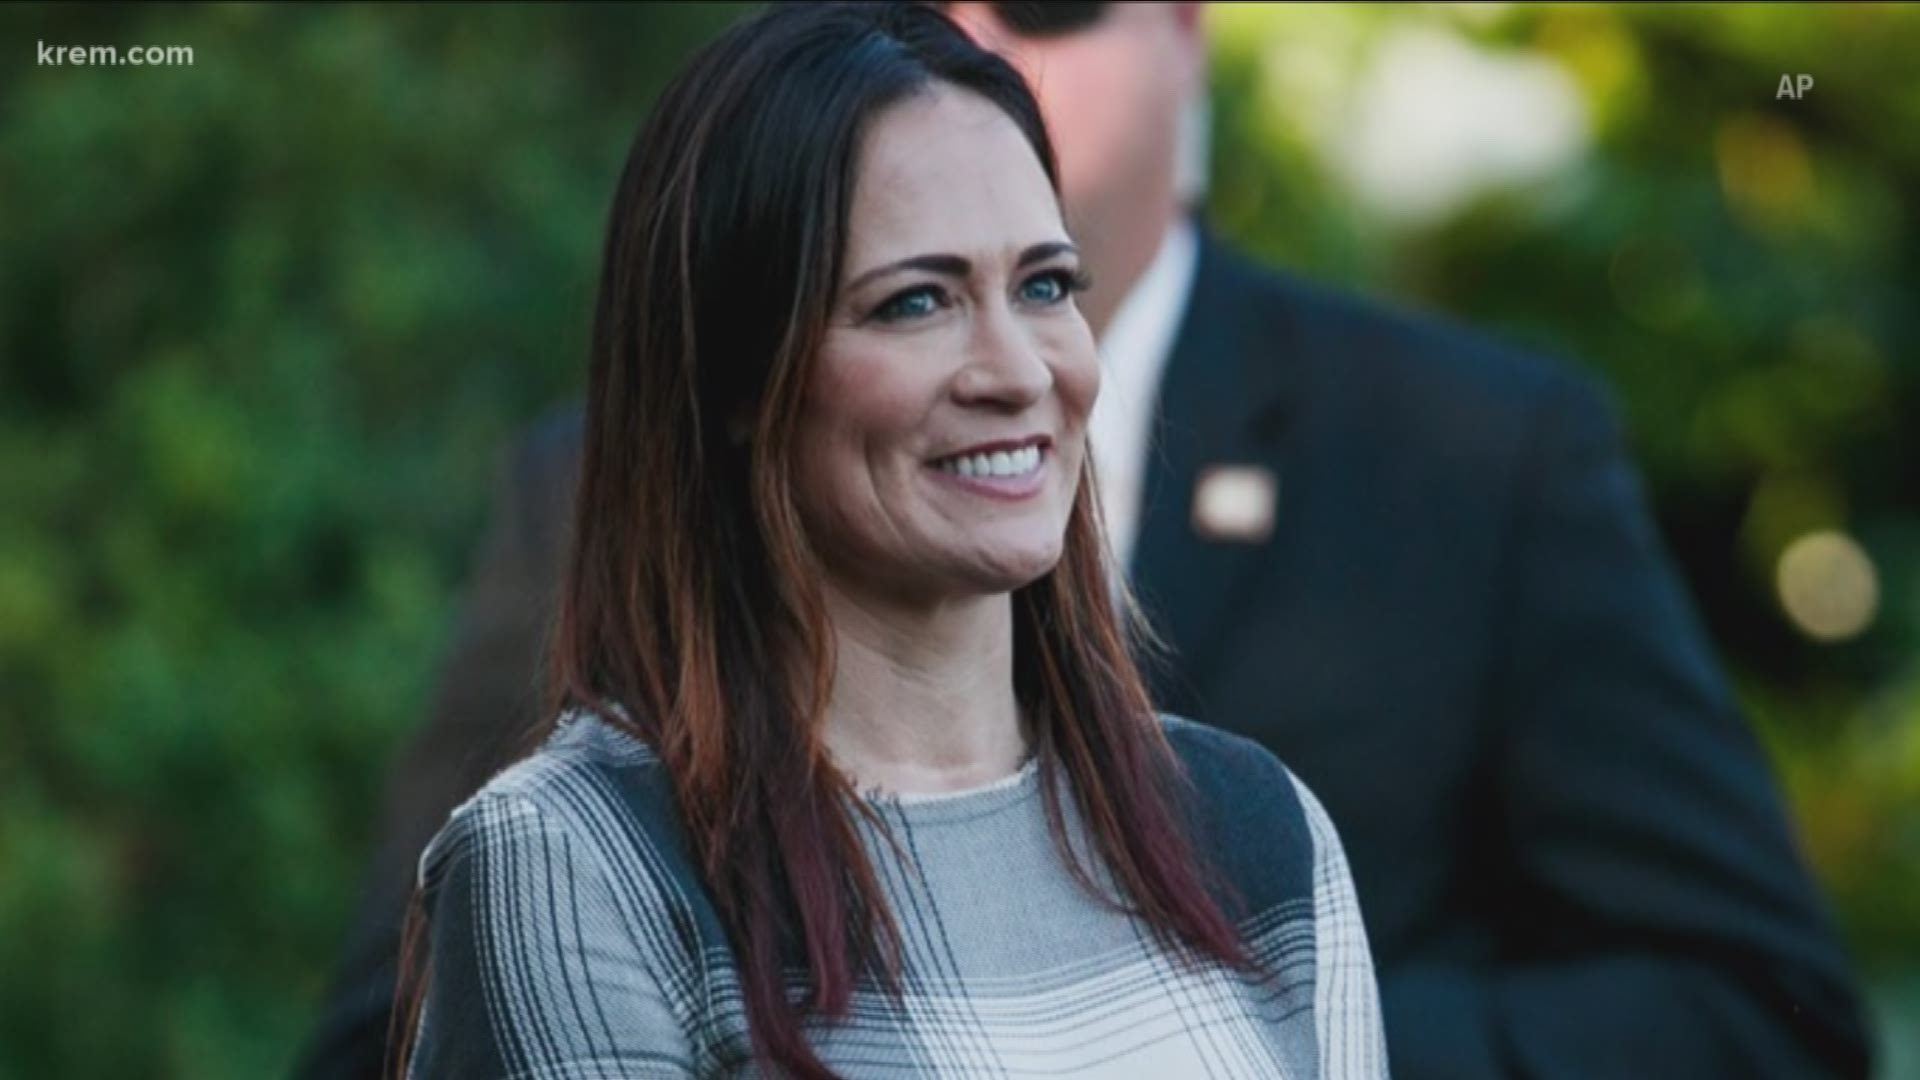 President Donald Trump's new White House Press Secretary is from Washington. The first lady's spokesperson, Stephanie Grisham, will replace Sara Sanders.. who is stepping down at the end of the week. Grisham grew up in East Wenatchee and graduated from Eastmont High School.